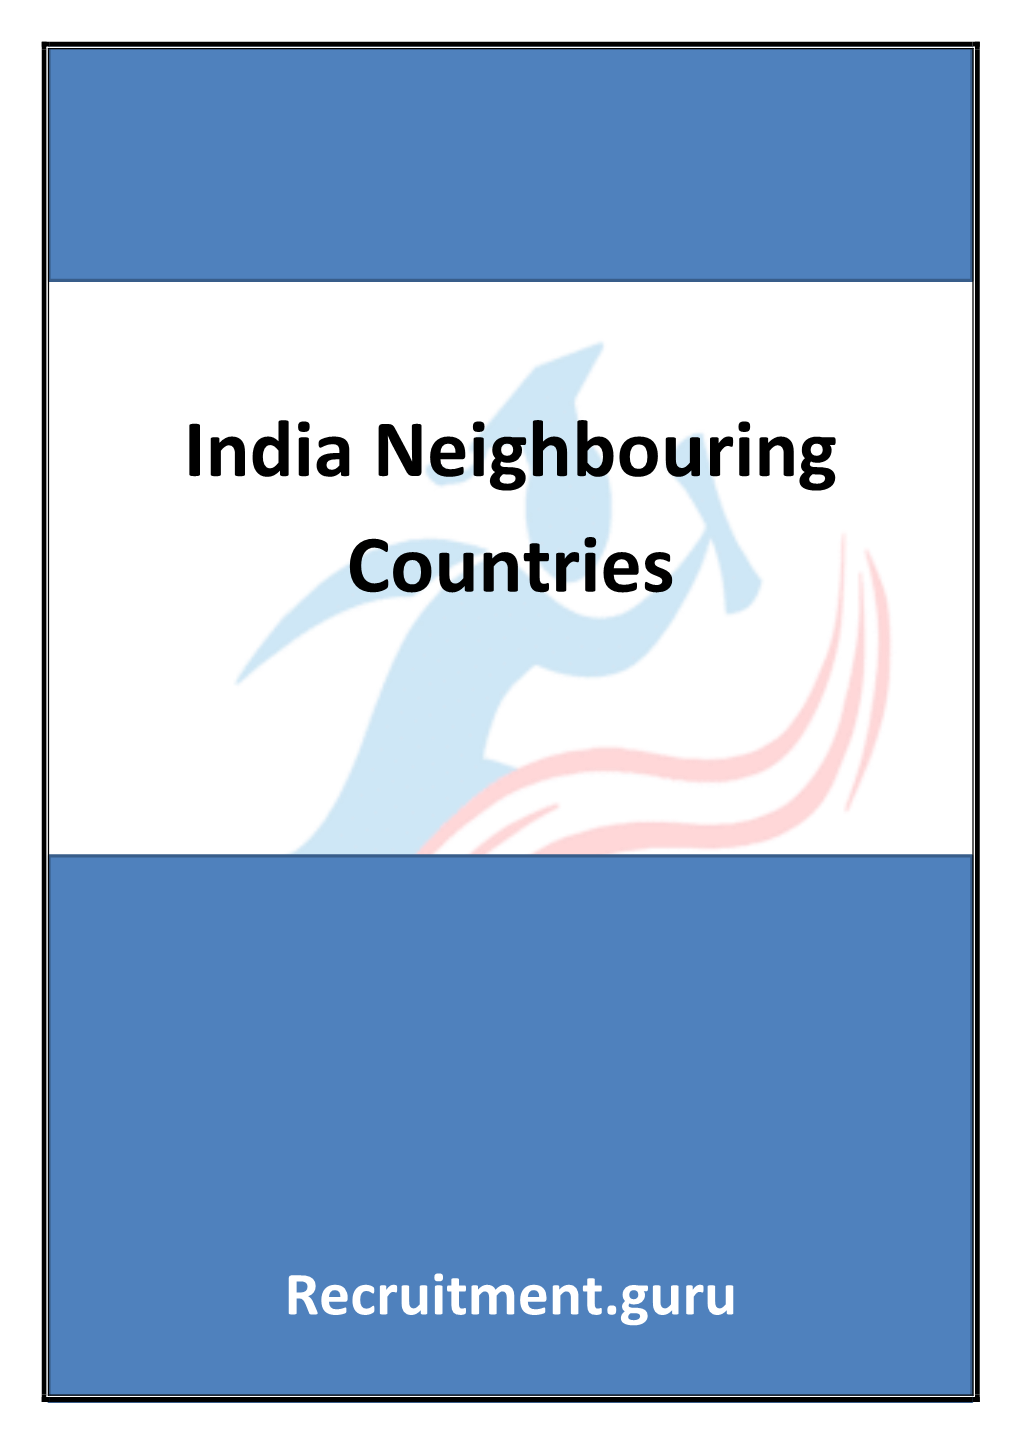 India Neighbouring Countries